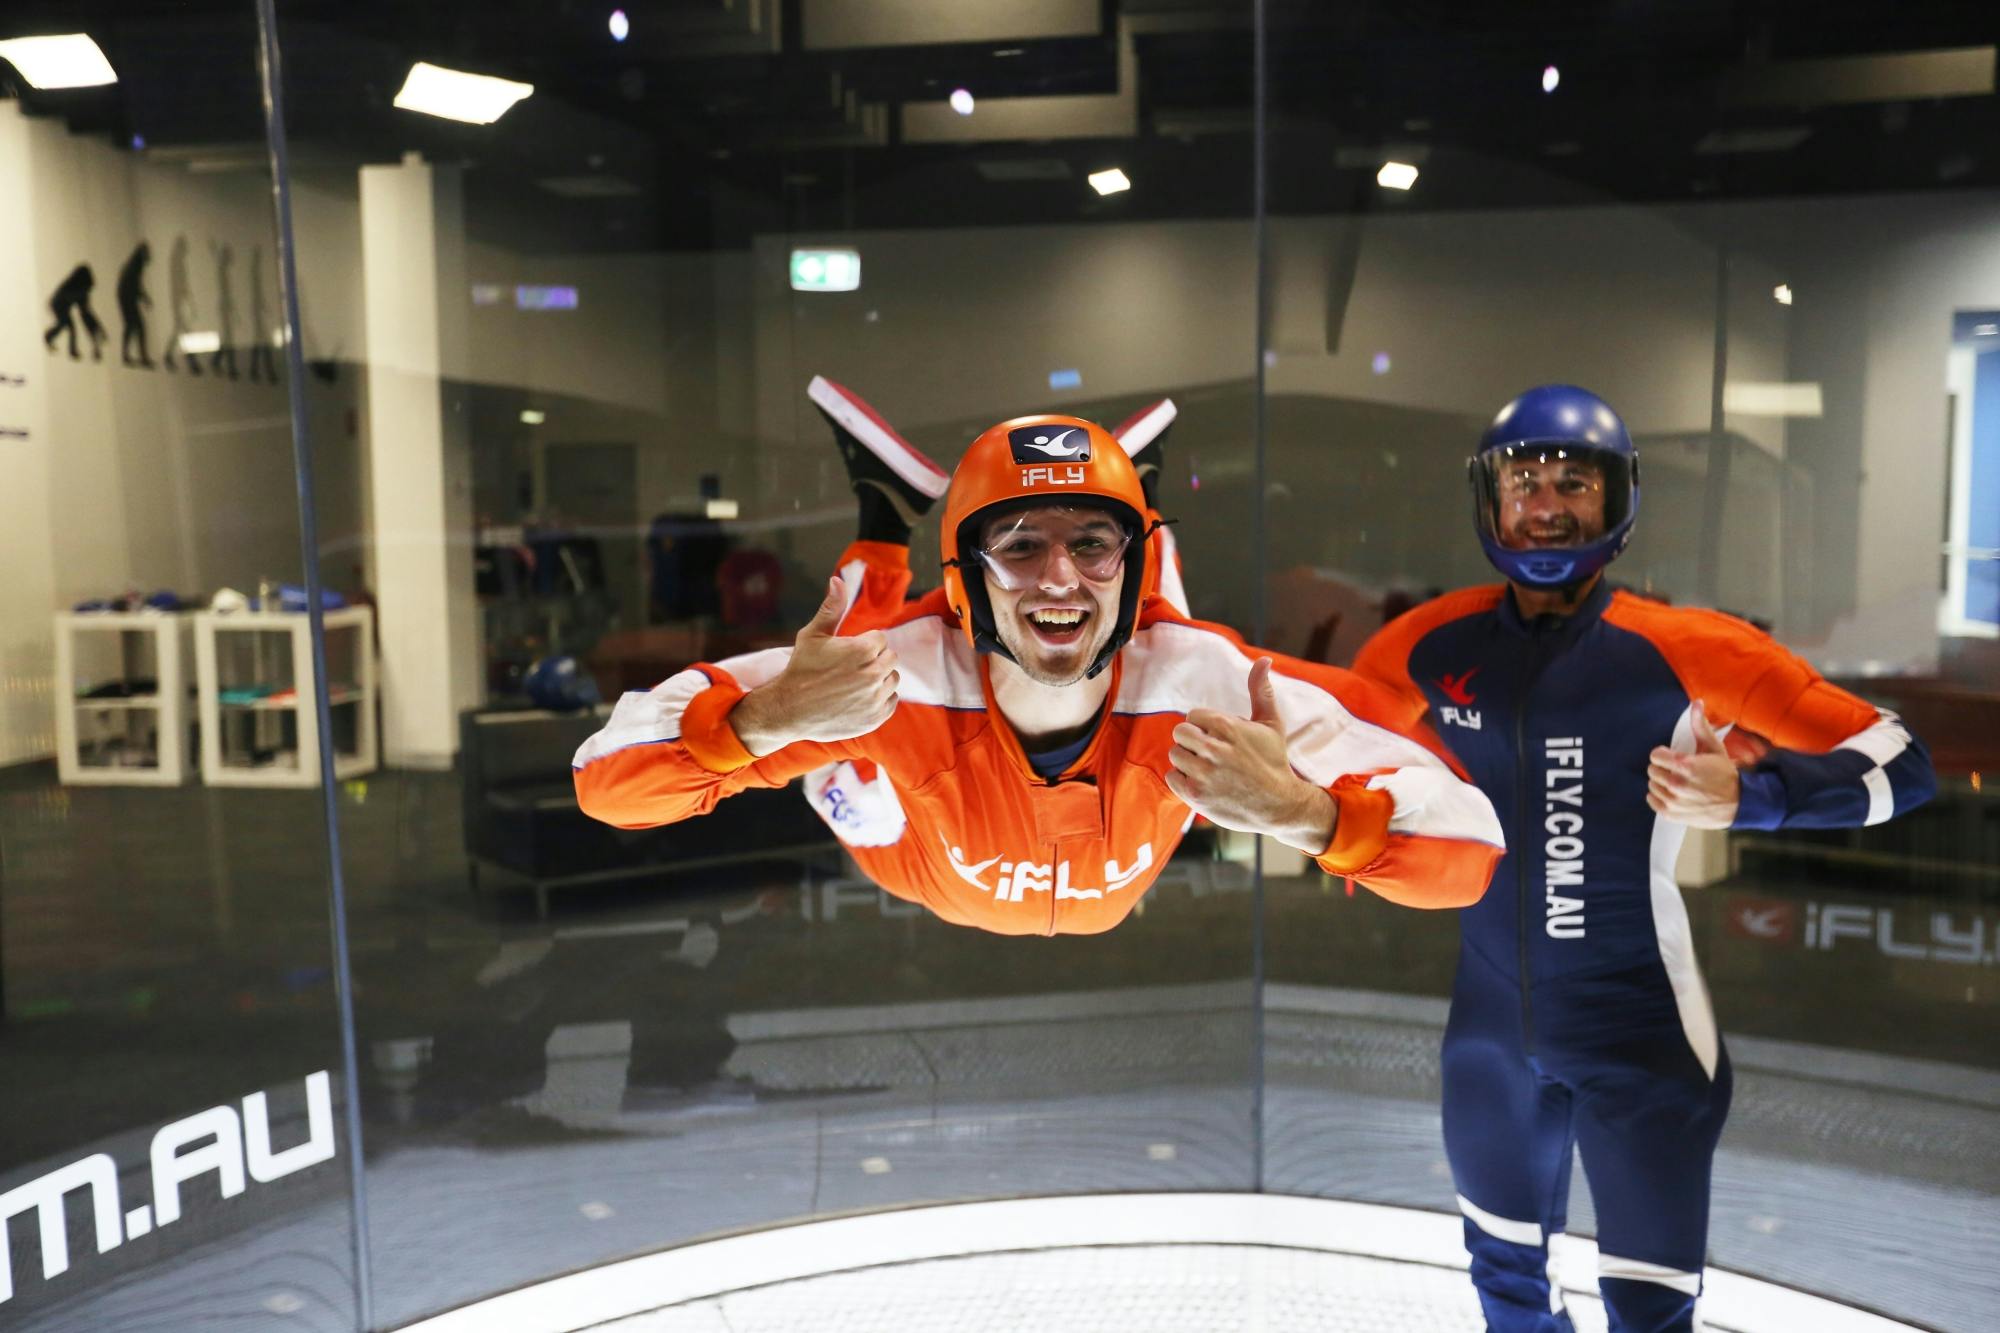 Gold Coast indoor skydiving experience Musement